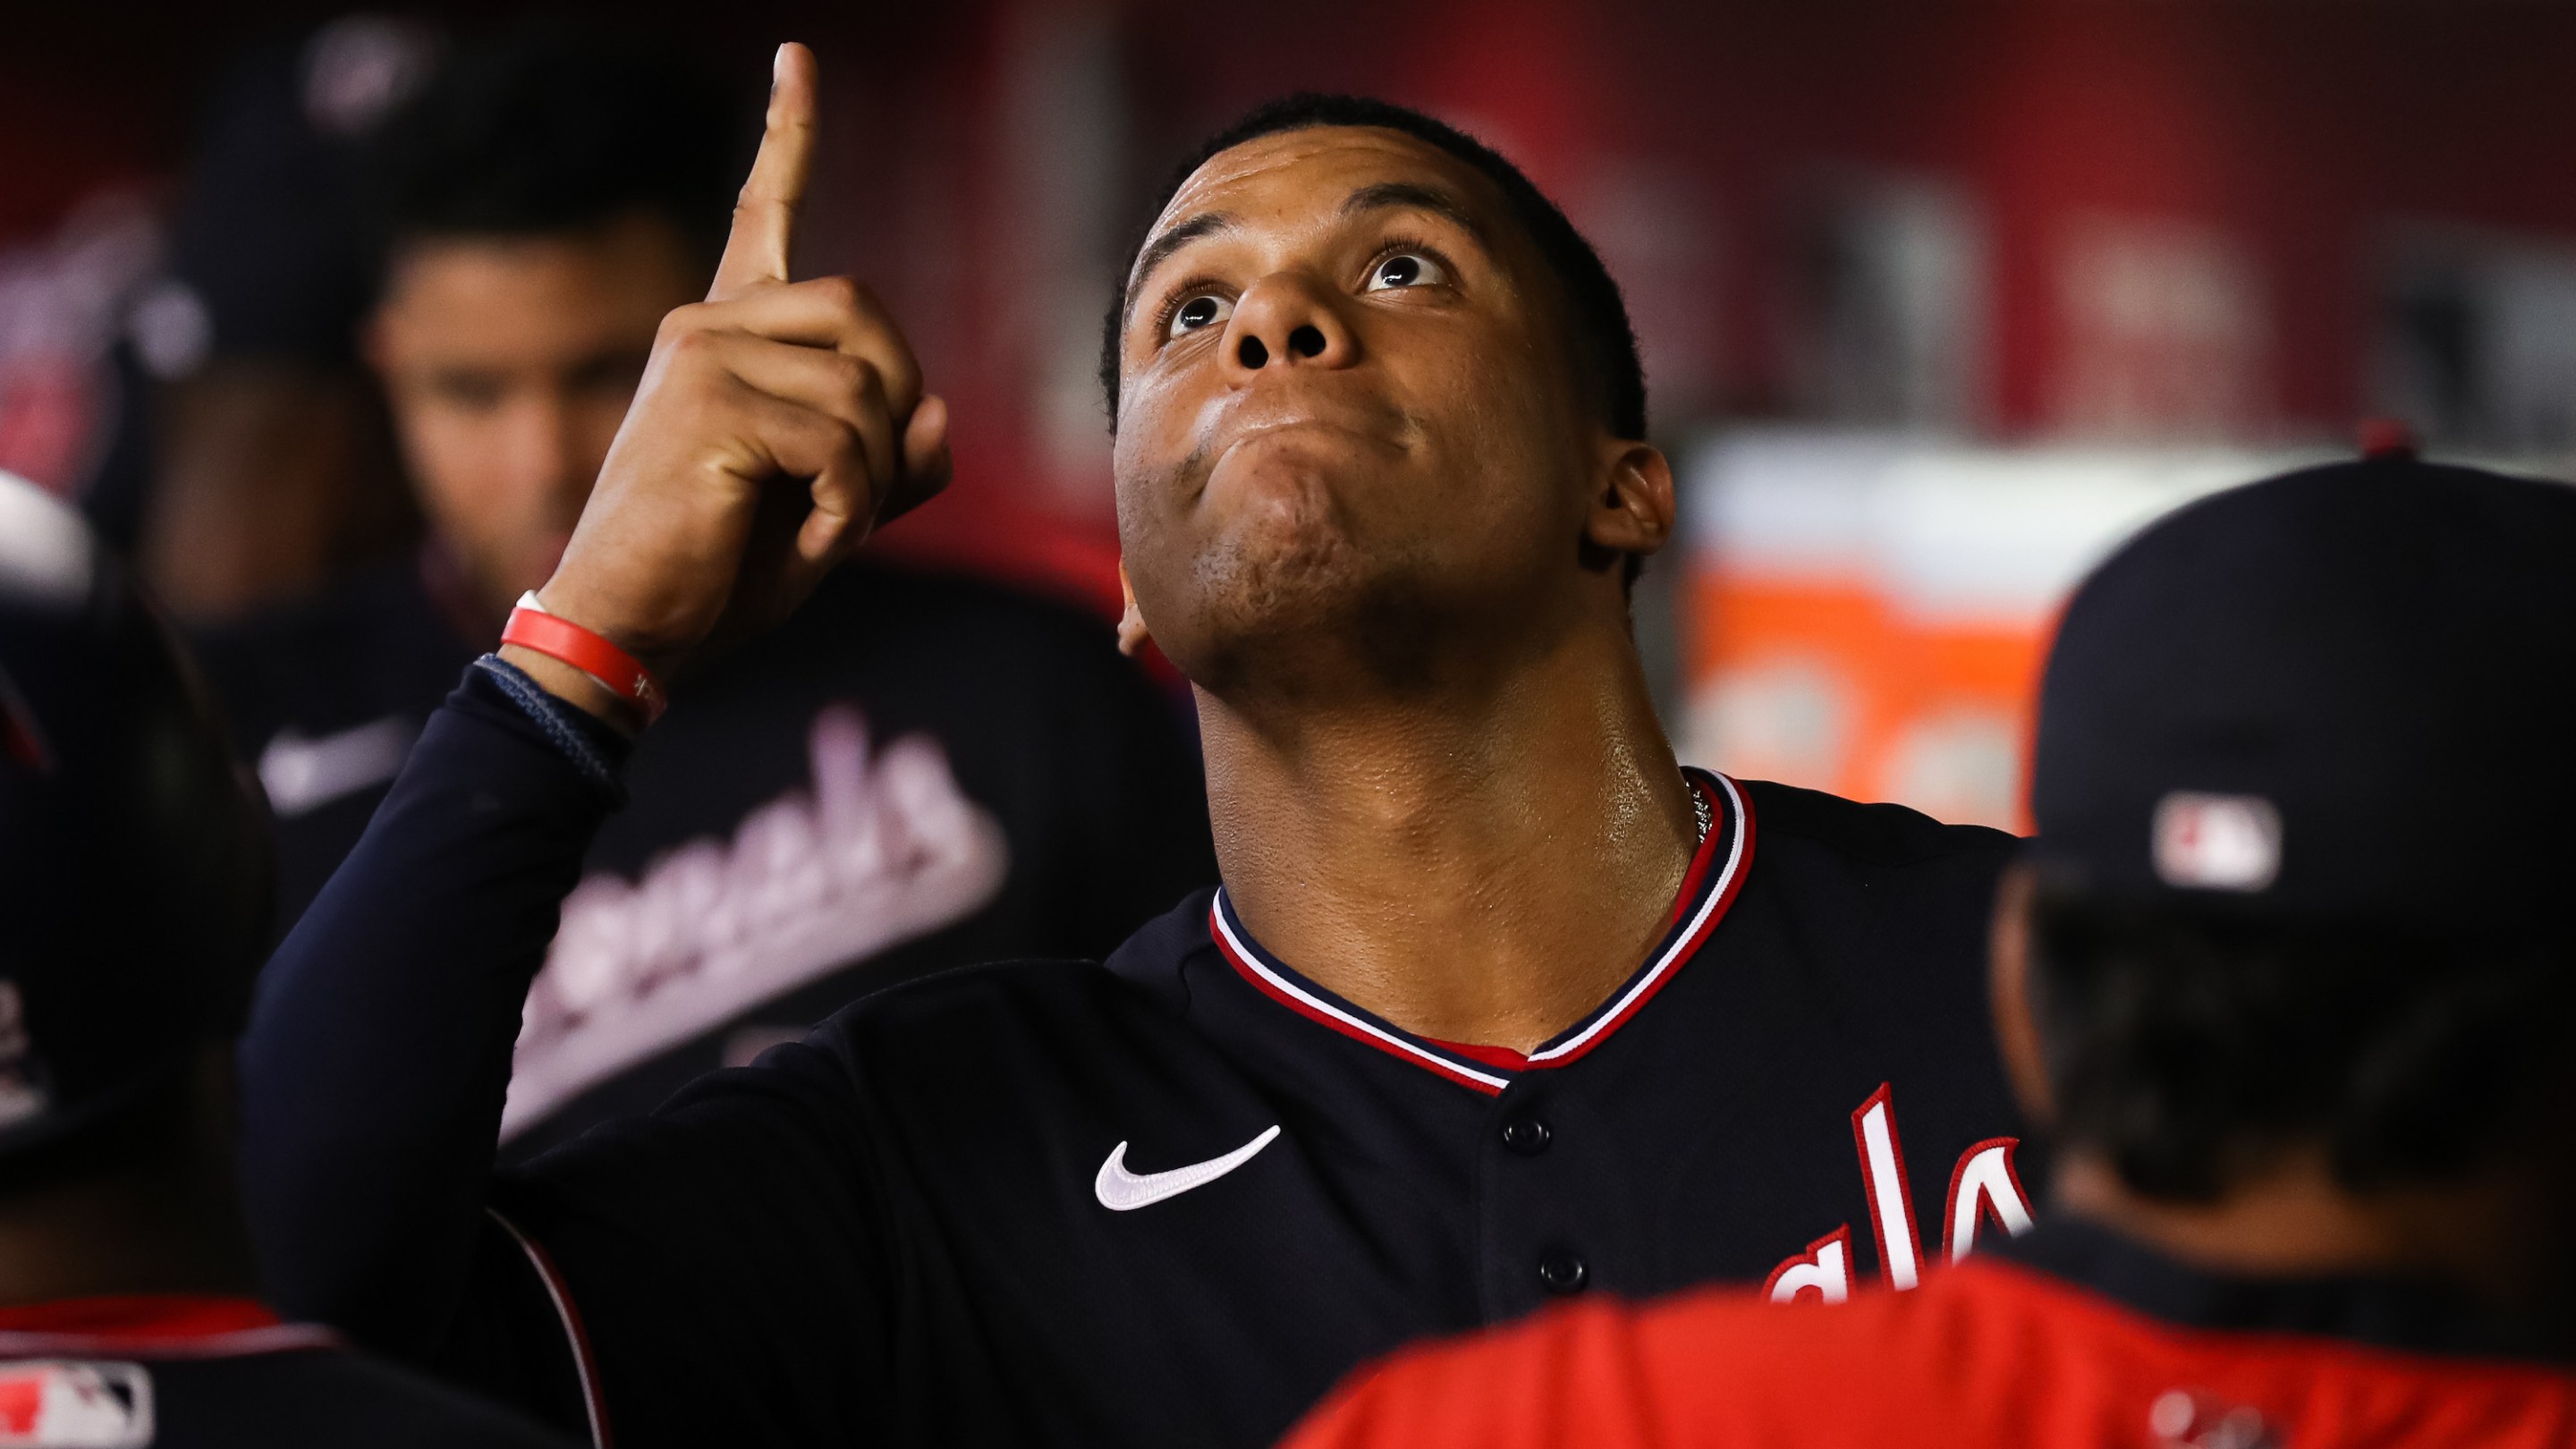 Juan Soto of the Washington Nationals, seen here pointing up.